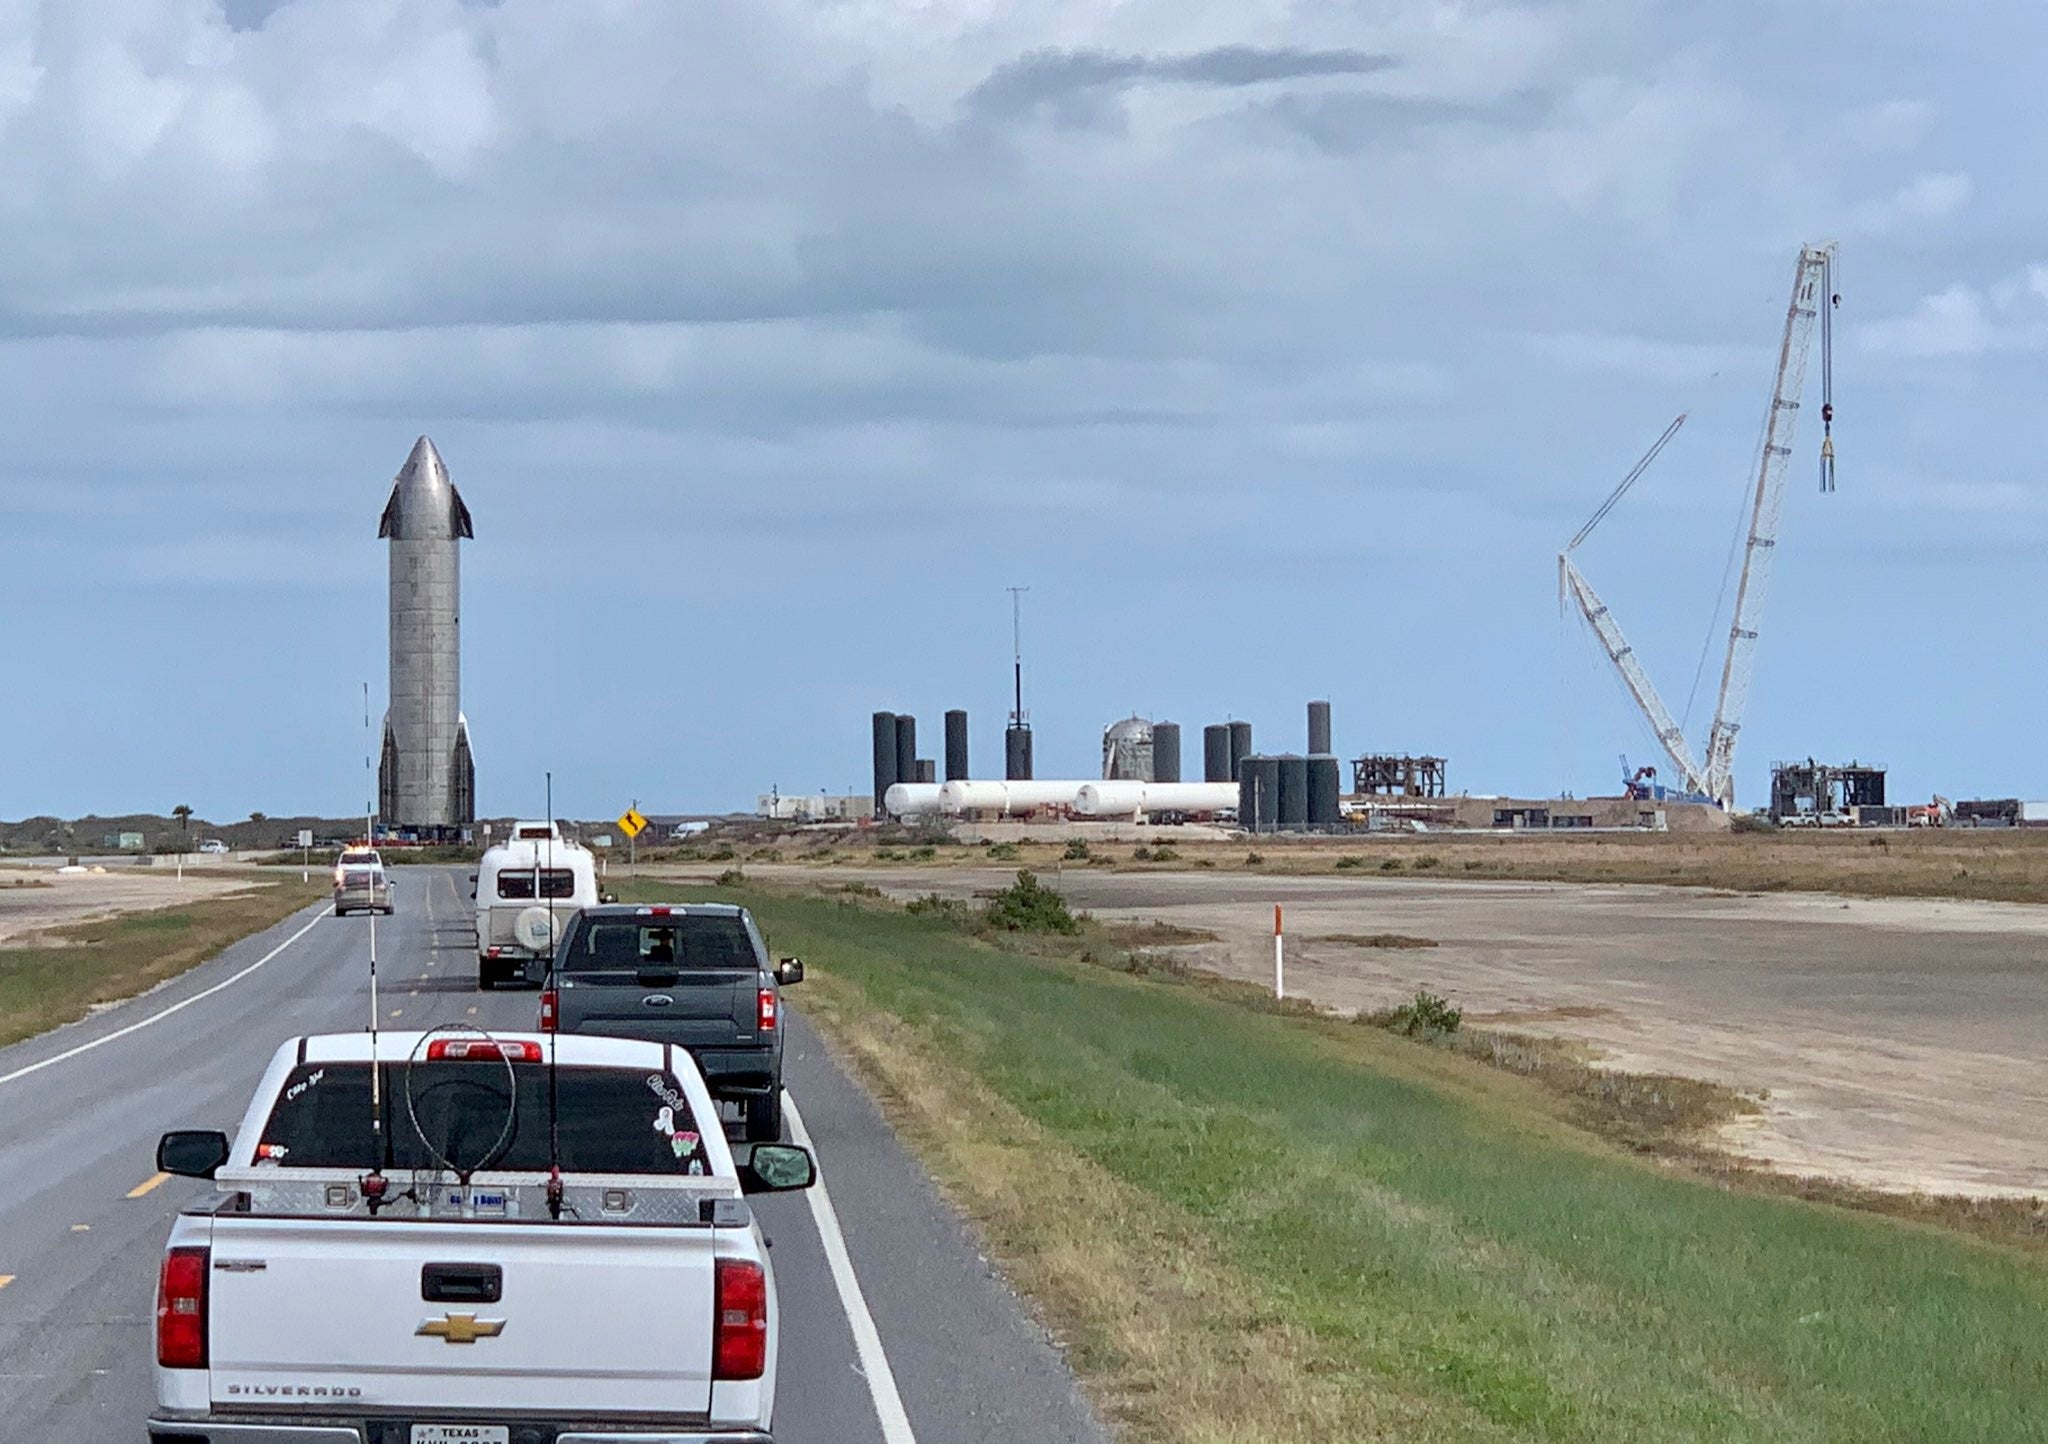 SpaceX Transports Starship SN9 to the Launch Pad to Prepare for the Next Test Flight